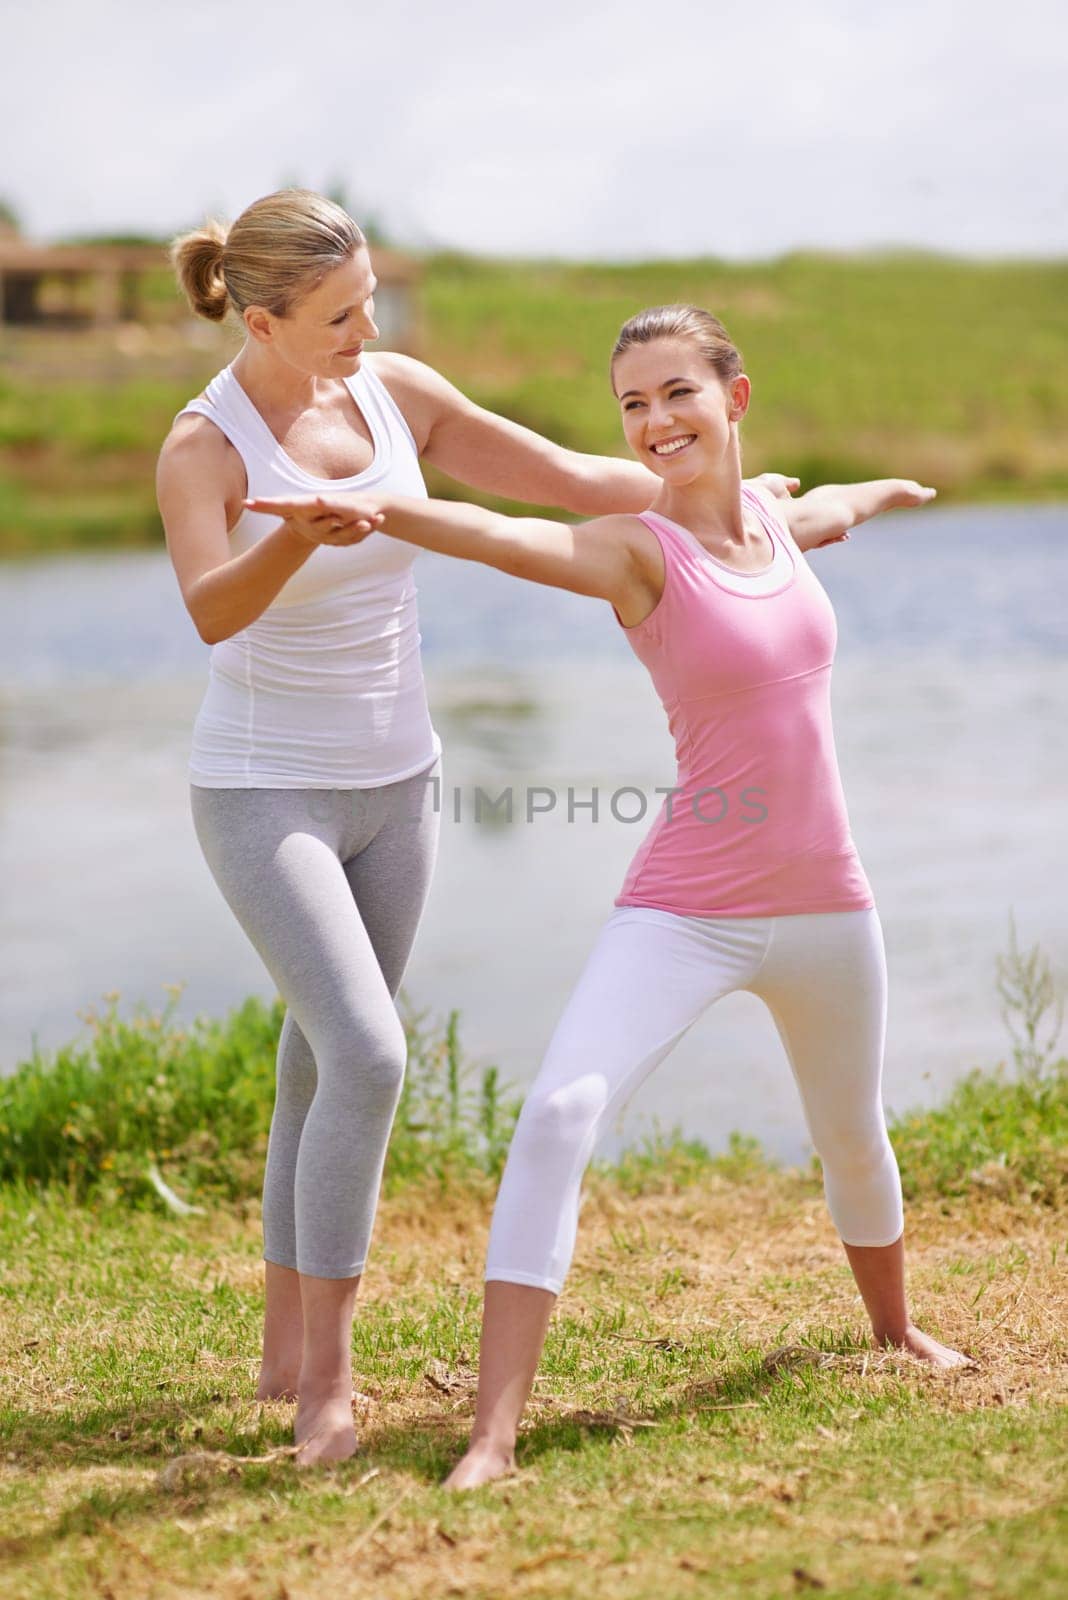 Women, yoga class and help with exercise outdoor for health, wellness and healing with coach. Fitness, pilates and stretching muscle for workout in park or garden, personal trainer and balance.